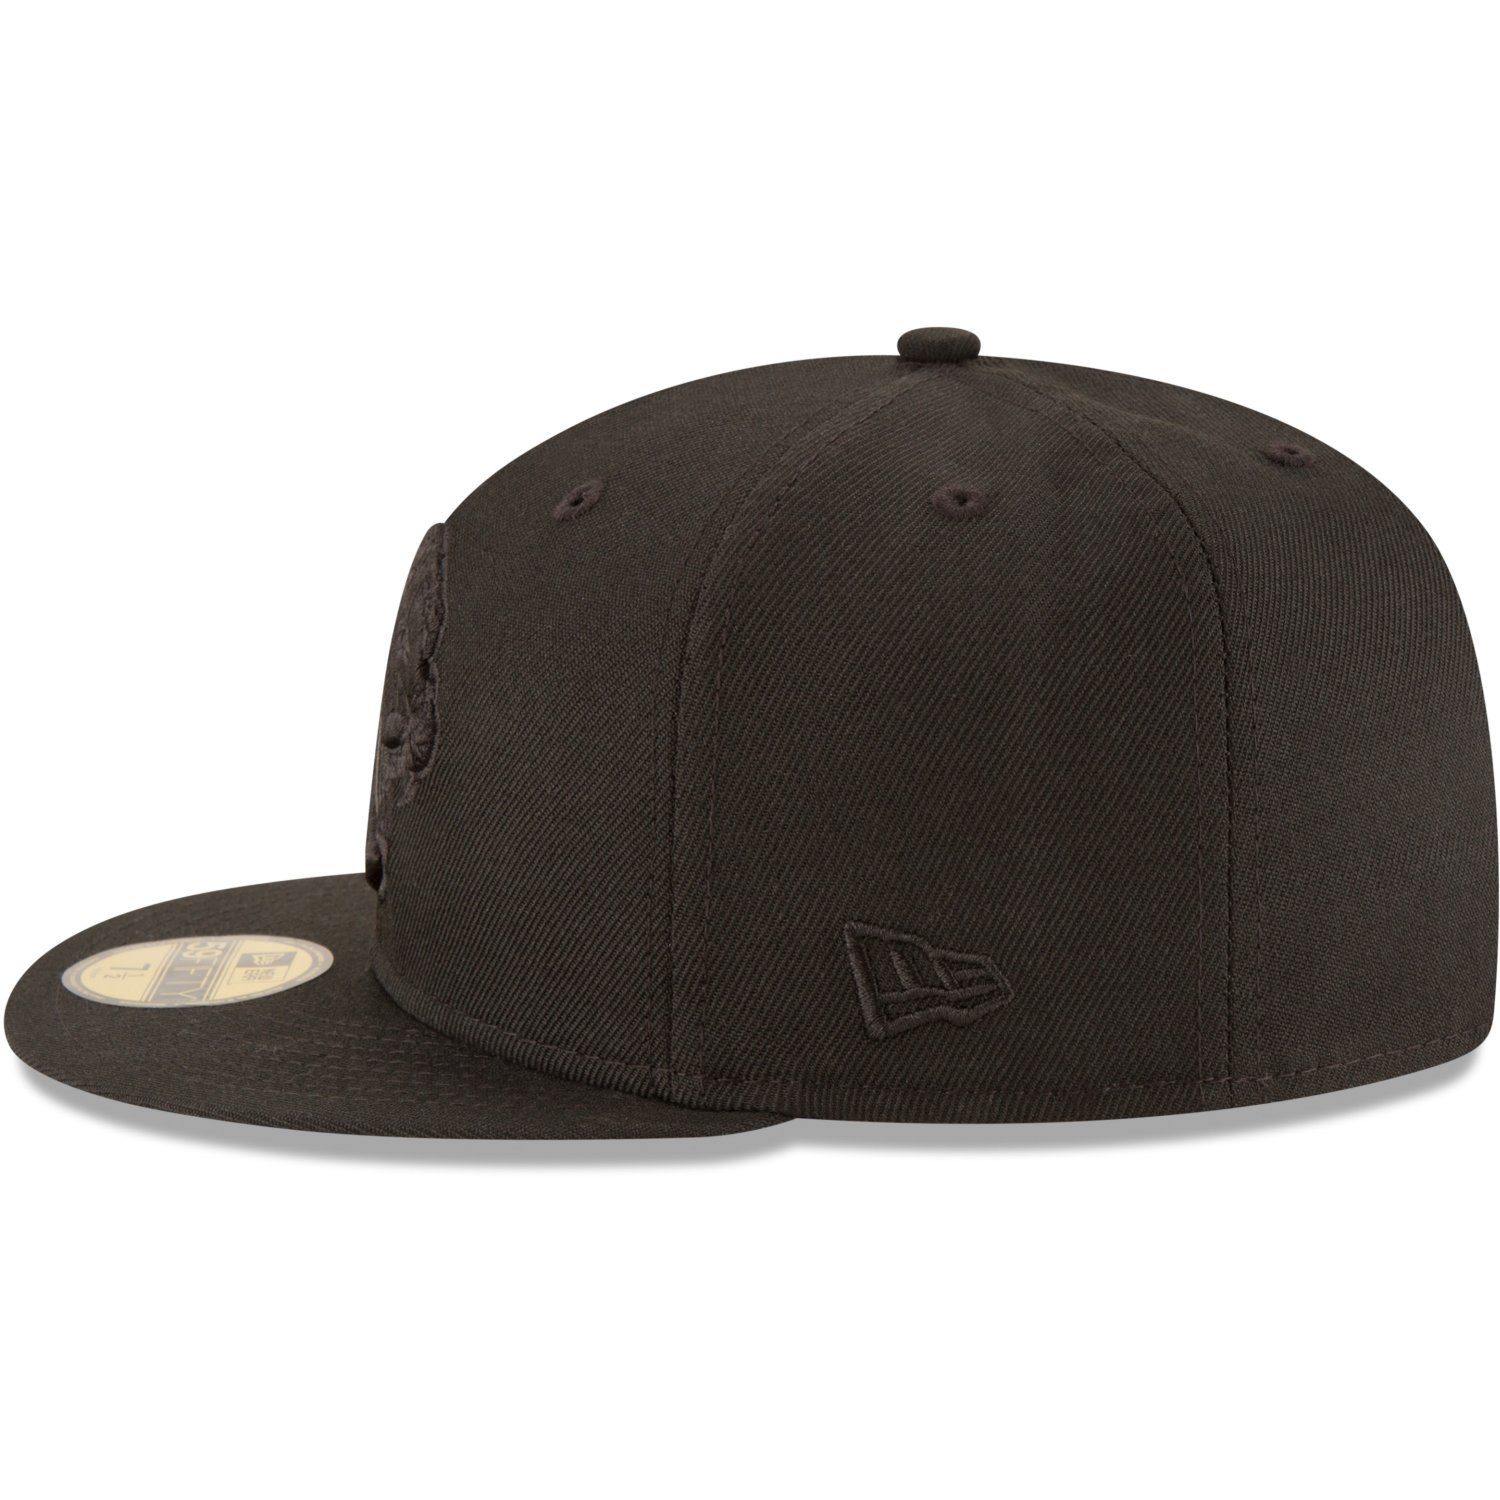 Fitted Era Jacksonville New NFL Jaguars Cap 59Fifty